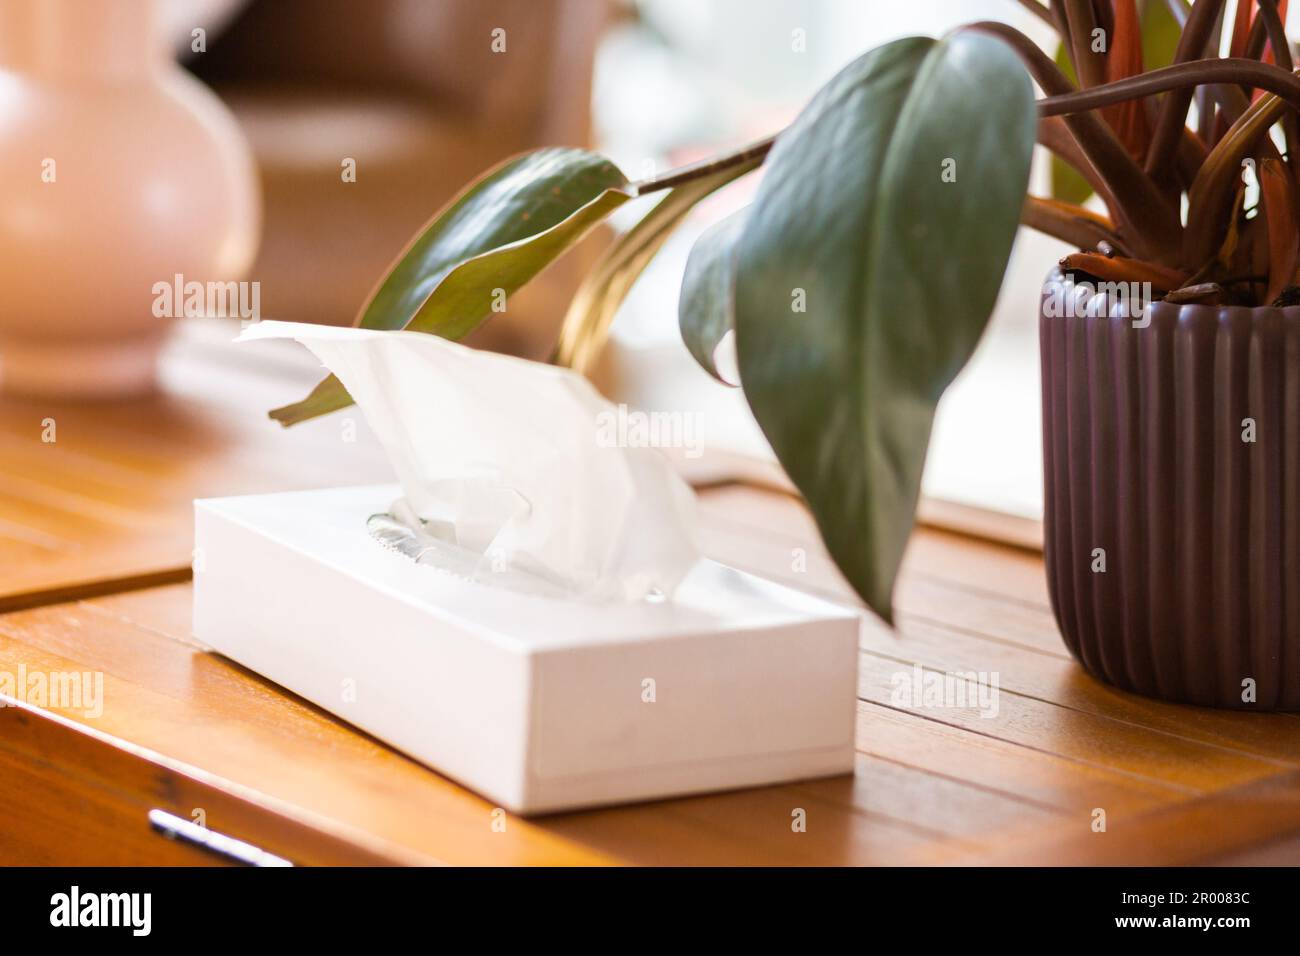 Box of nose tissues beside plant on table in living room of house for blowing nose on Stock Photo